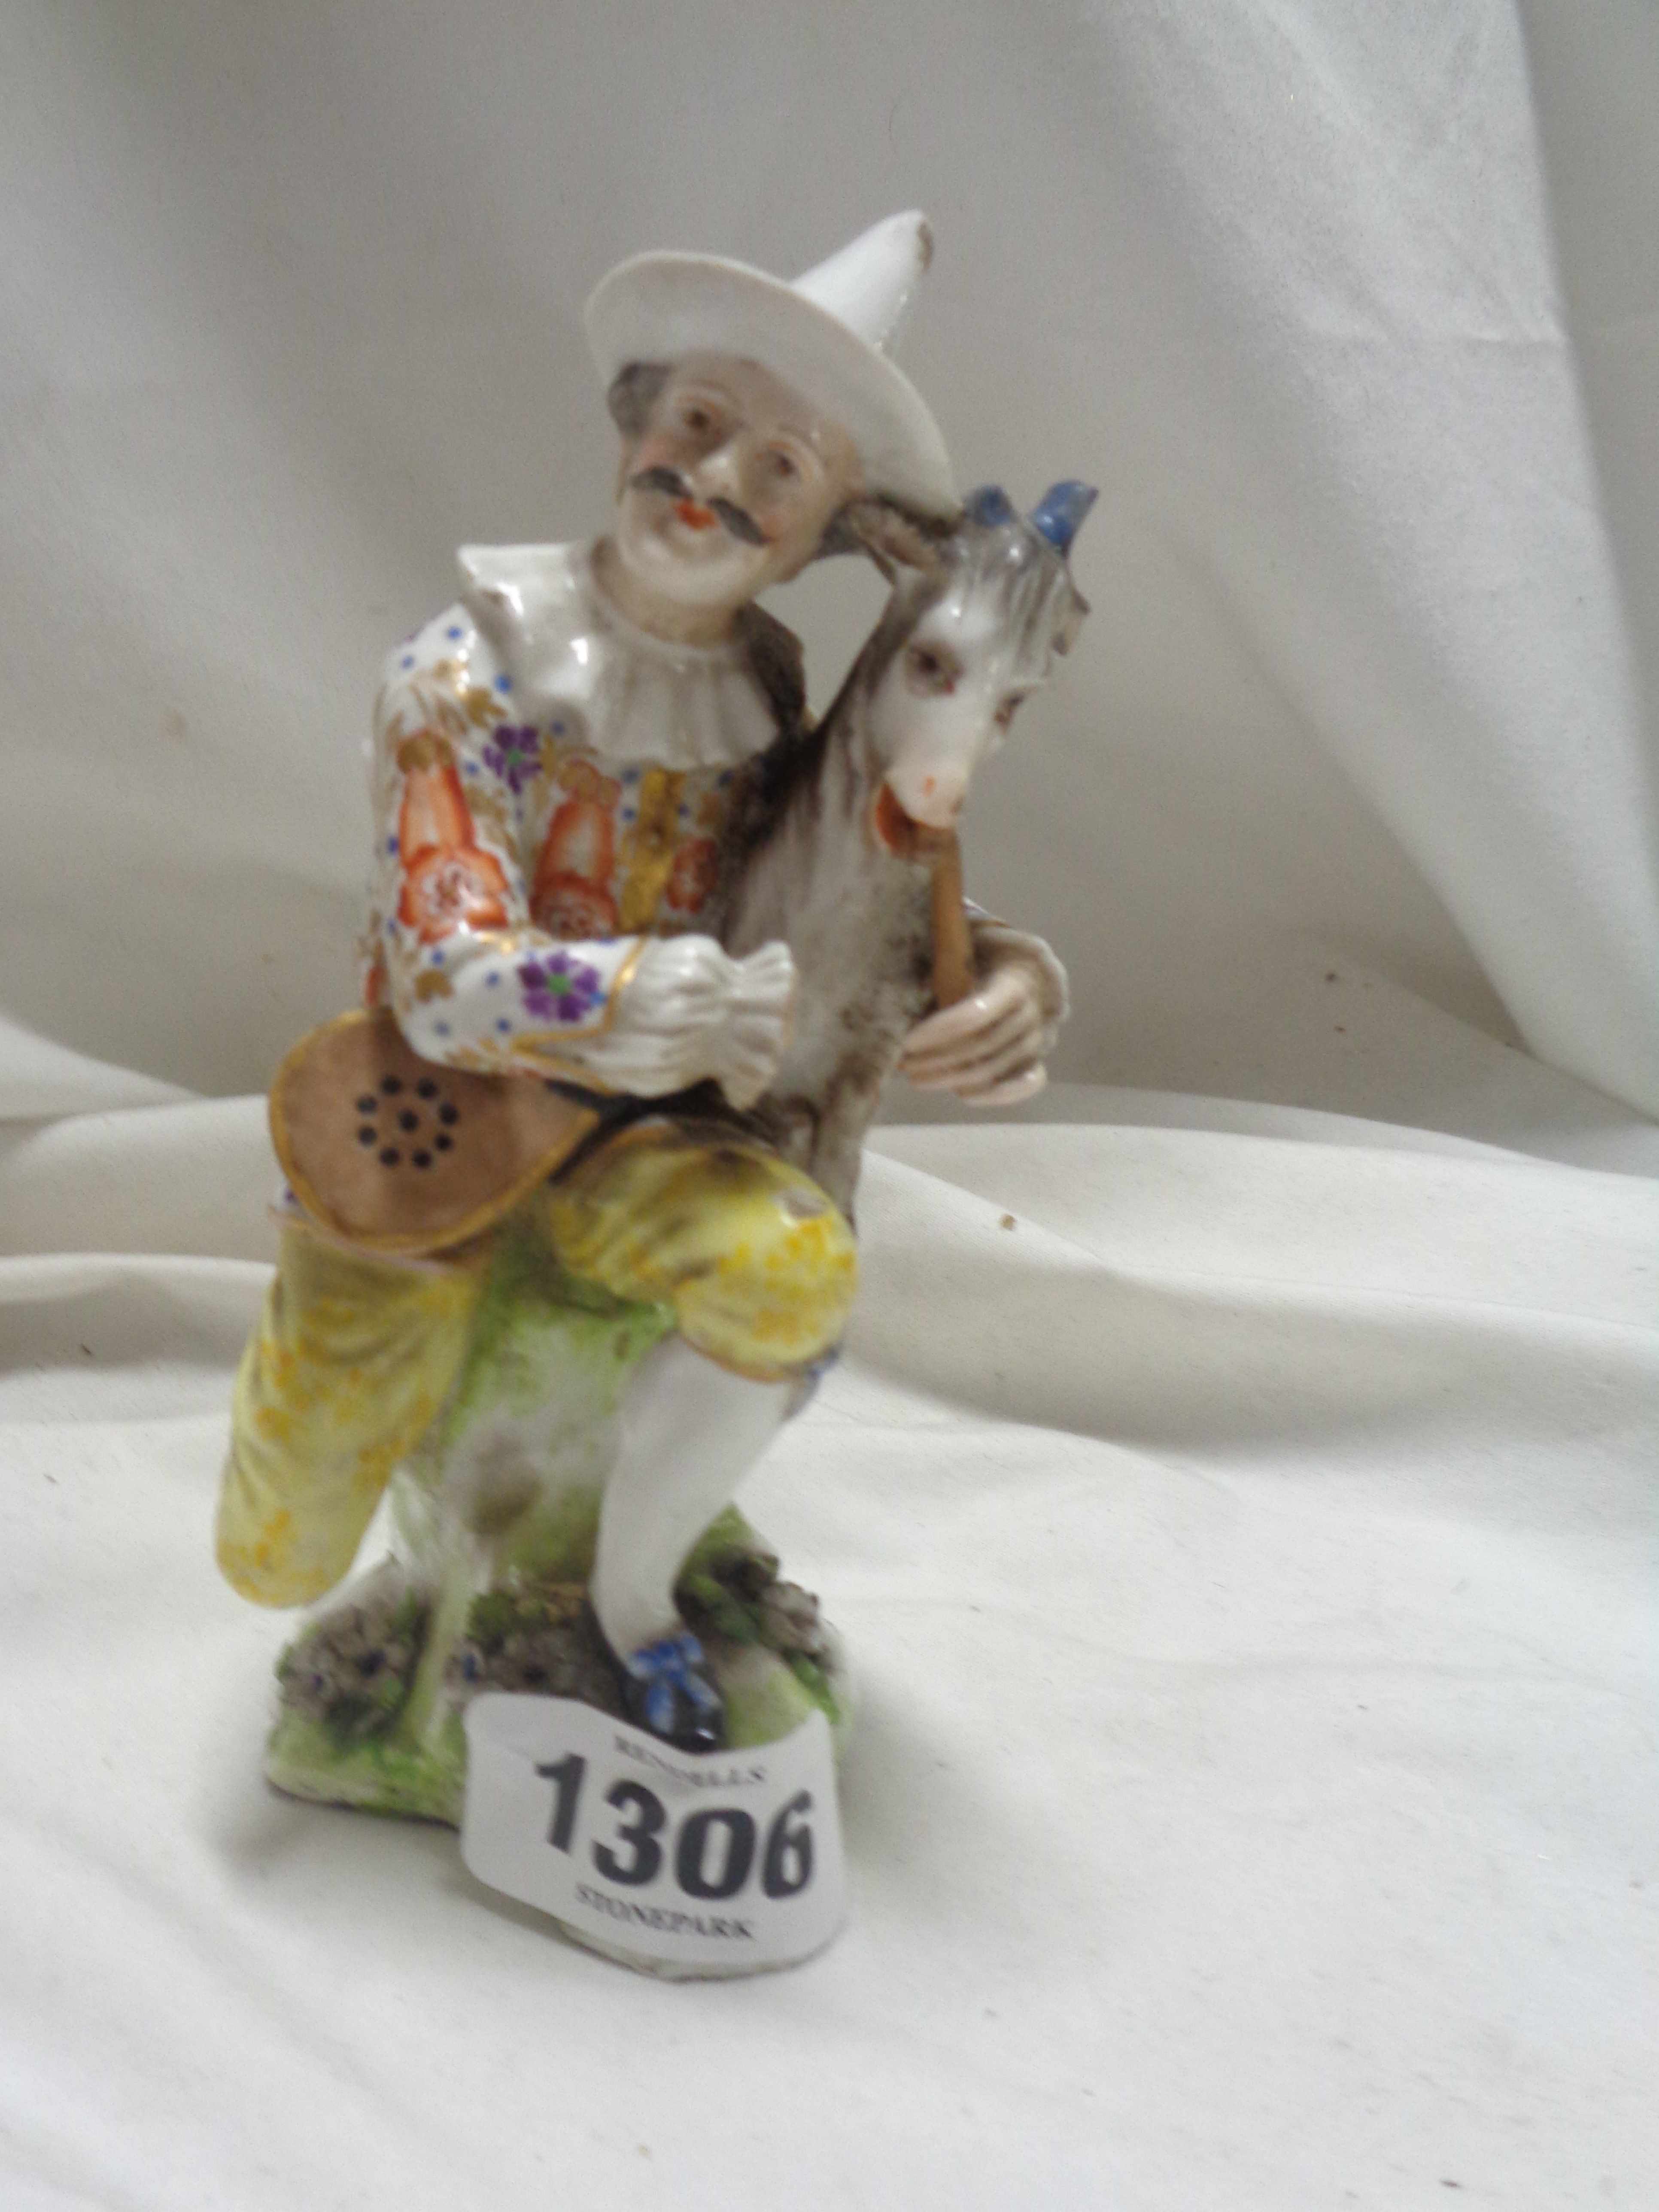 An antique Chelsea style porcelain figurine, depicting a man with a goat - gold anchor mark to